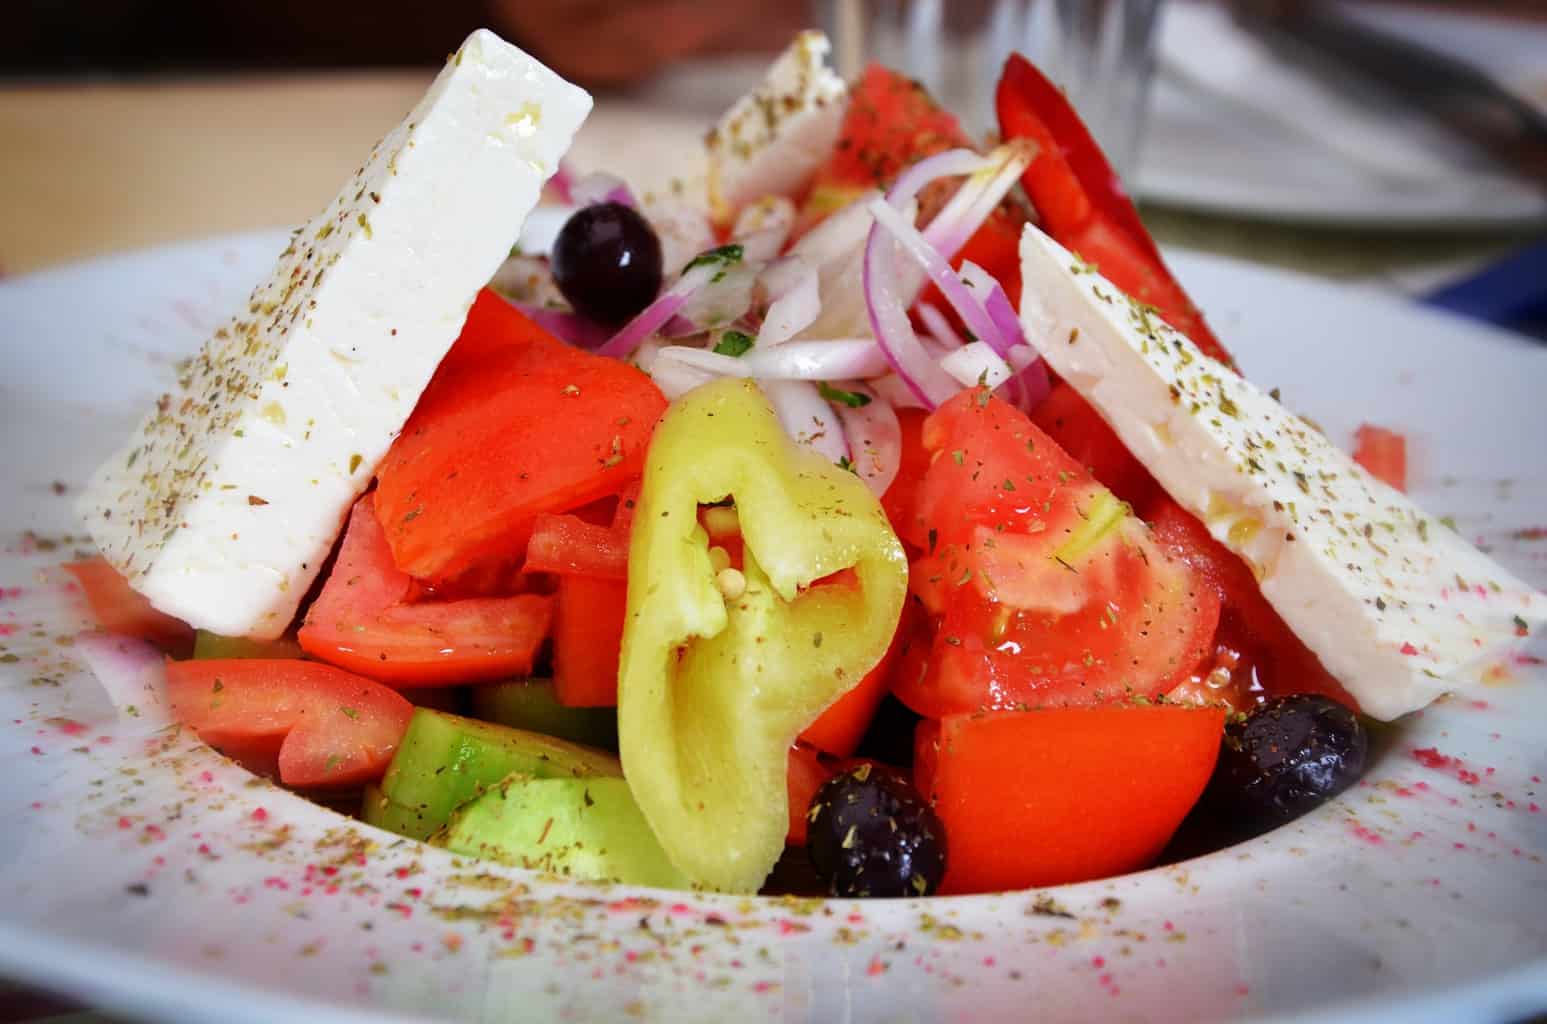 After such a busy day, you deserve to relax and enjoy some amazing Greek food, like this delicious Greek salad. 